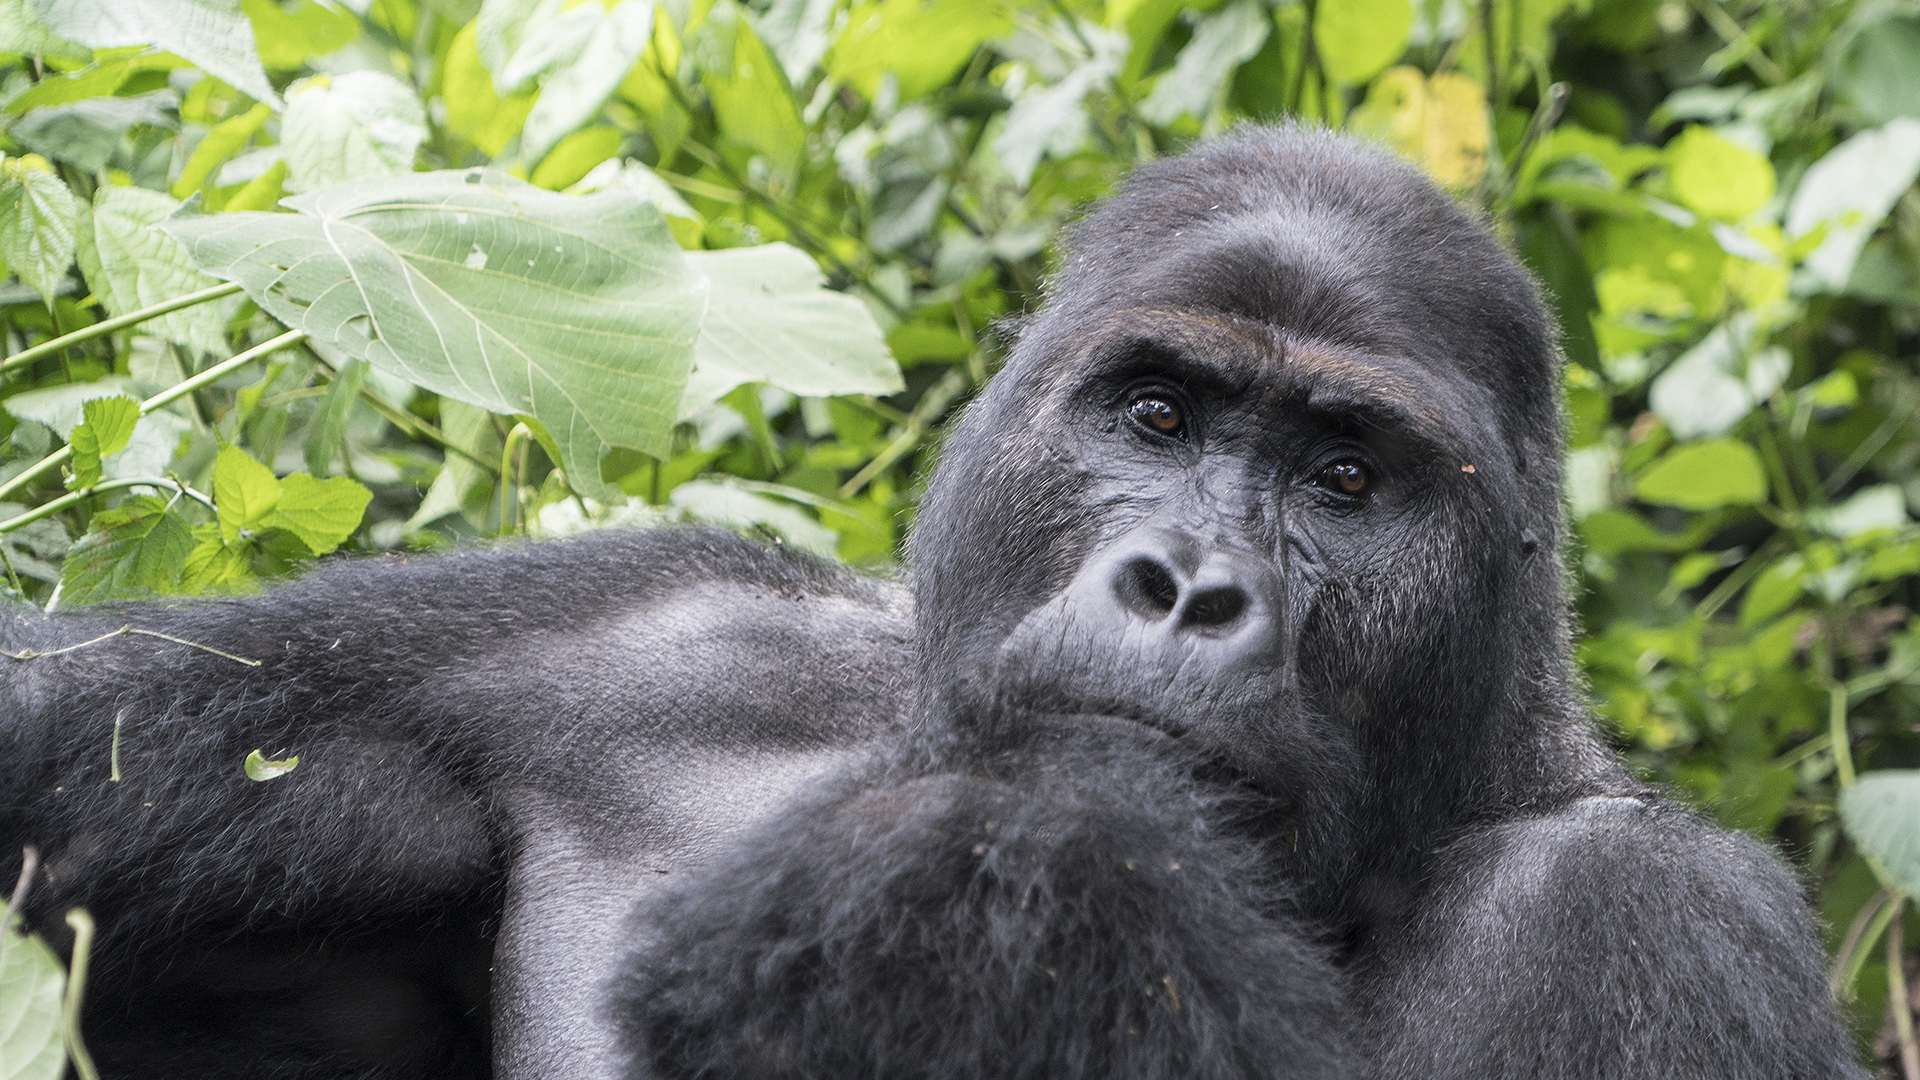 An adult gorilla sits with hand raised to face in front of a leafy backdrop